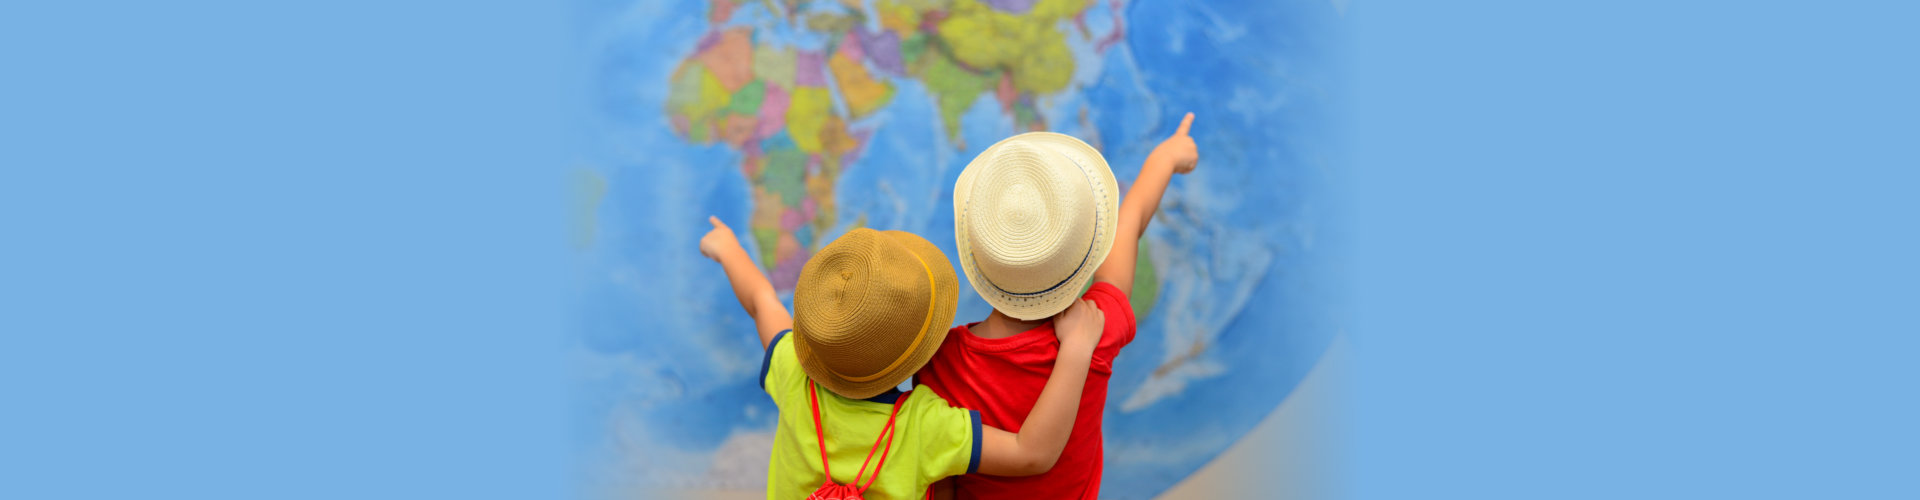 Children pointing in front of a map of the world